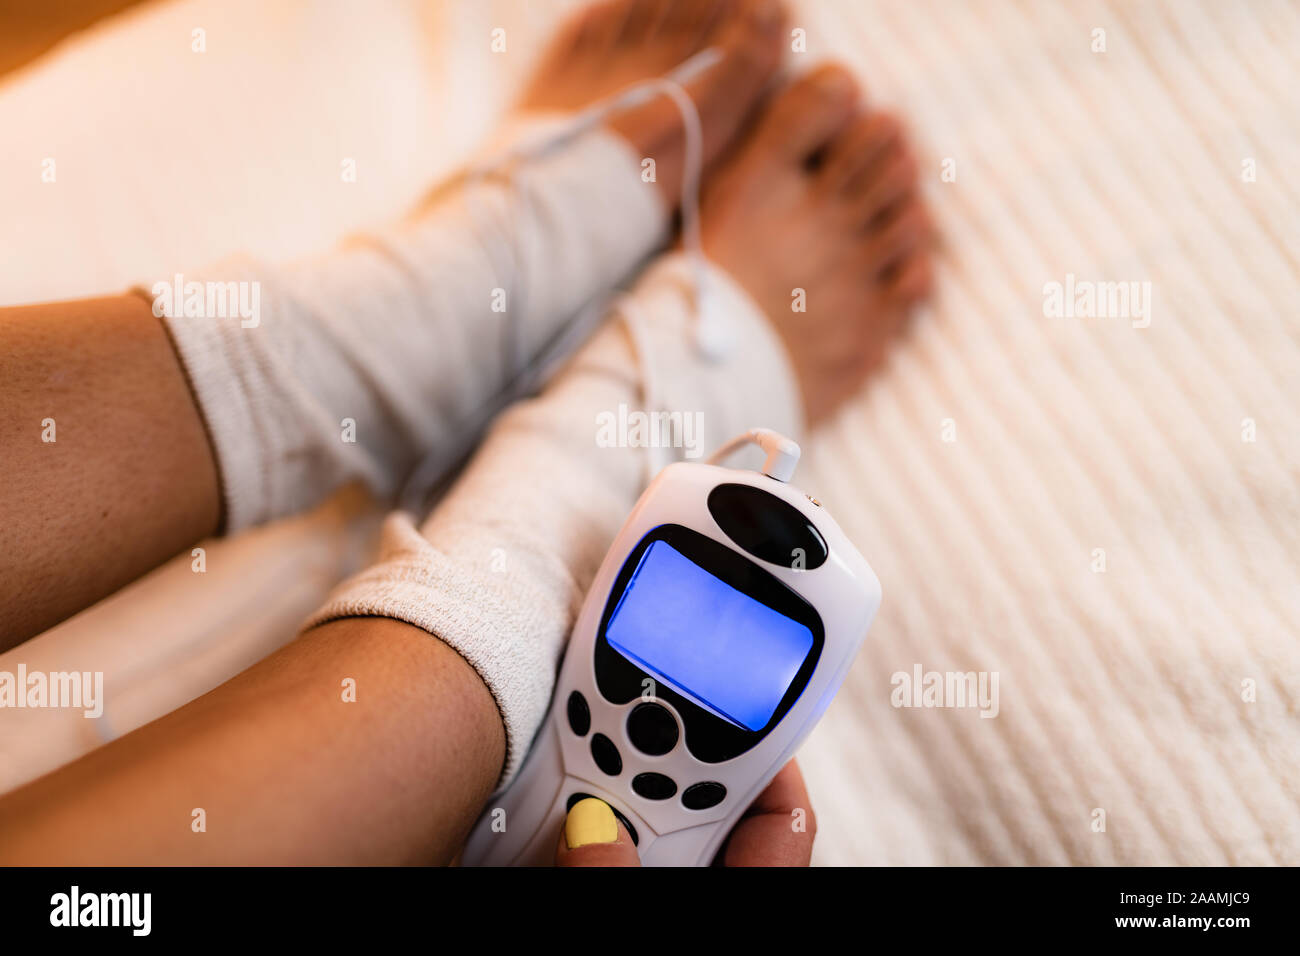 https://c8.alamy.com/comp/2AAMJC9/physical-therapy-with-tens-machine-2AAMJC9.jpg